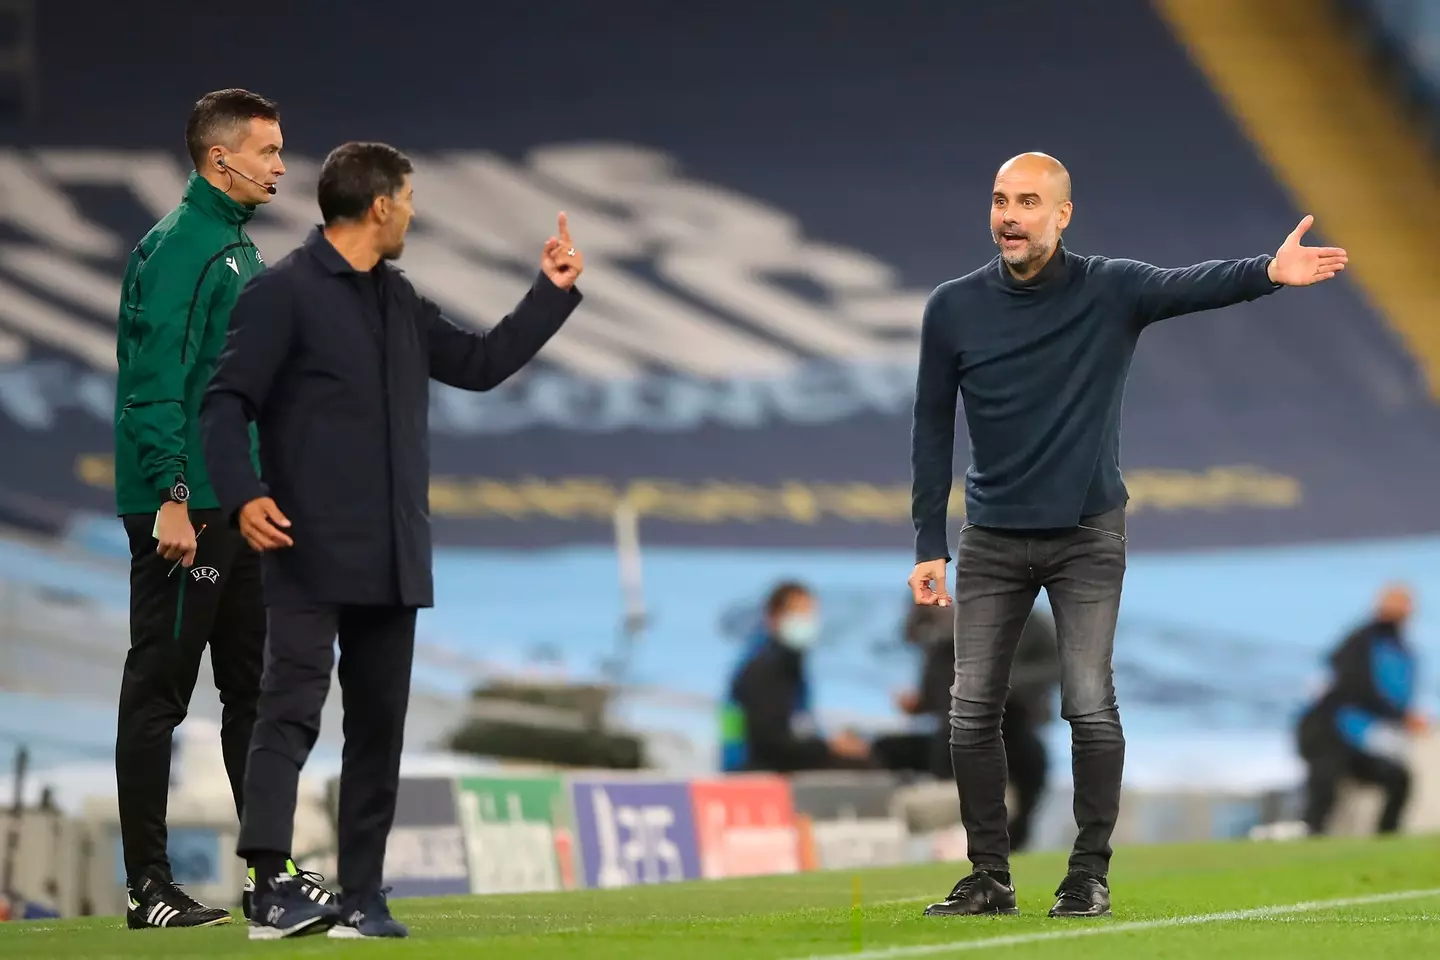 Sergio Conceicao accused Pep Guardiola of insulting him in 2020.